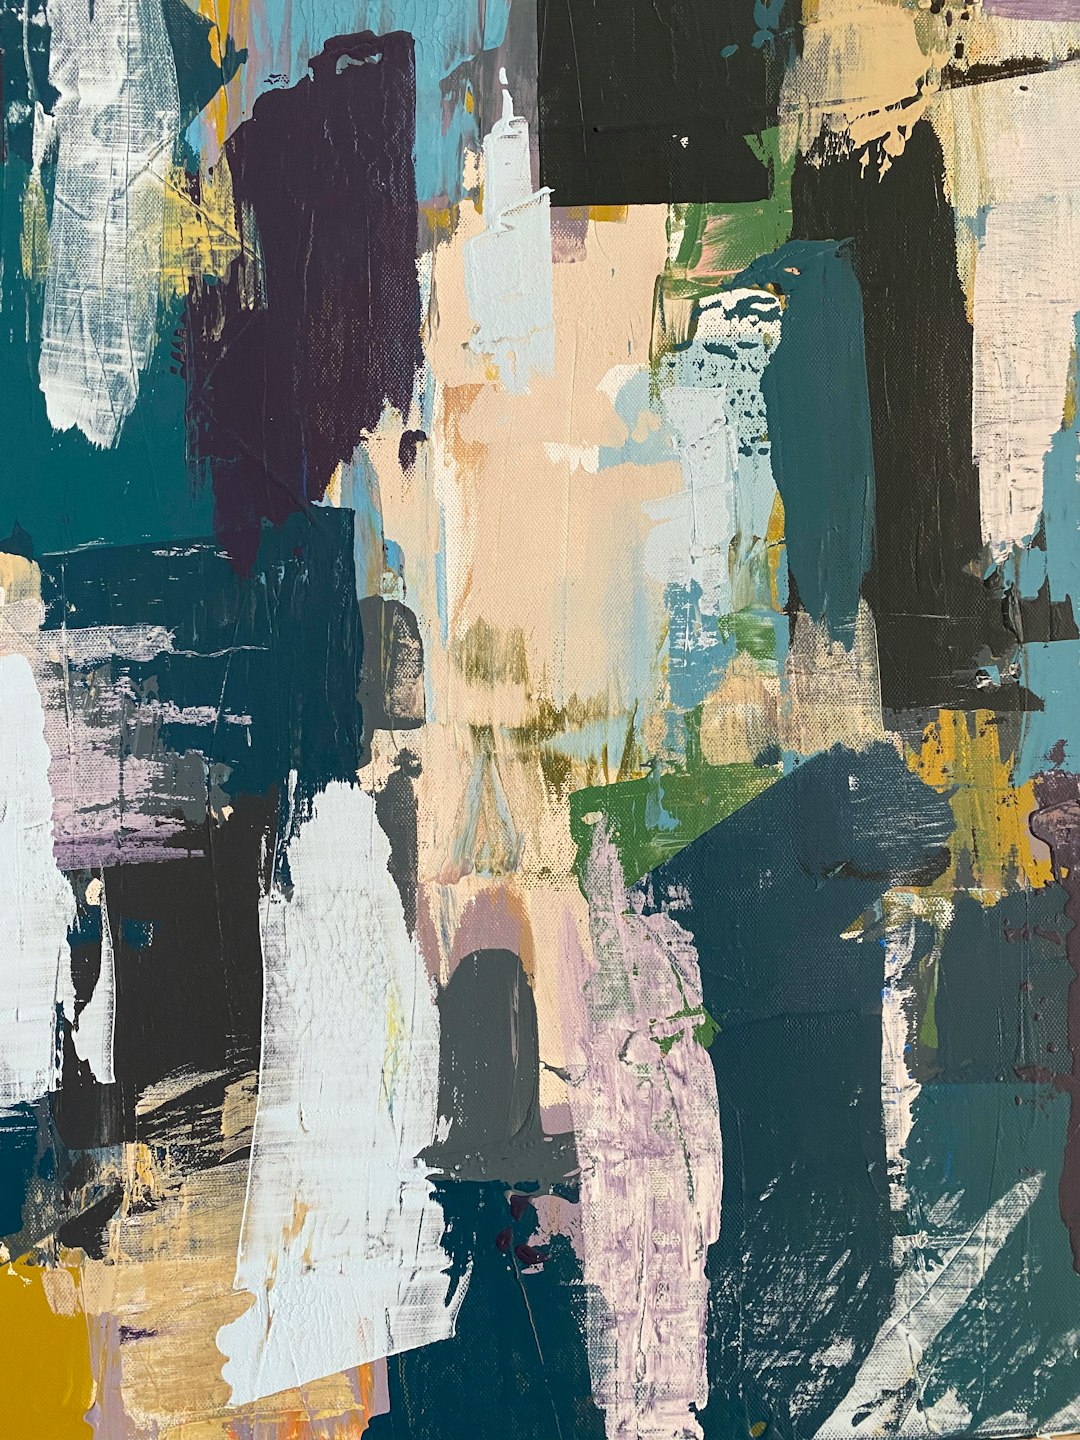 An abstract painting of mixed media with brushstrokes, palette knife and oil paint, various shades of teal, beige, purple, gray, green, white, brown, navy blue, yellow, black, and off-white colors. The background is filled with soft shapes and textures that give it an organic feel. In the center there is a silhouette in dark tones, and around him there are some color and texture in light pastel hues. It seems to be inspired in the style of cubism and expressionist art styles. –ar 3:4